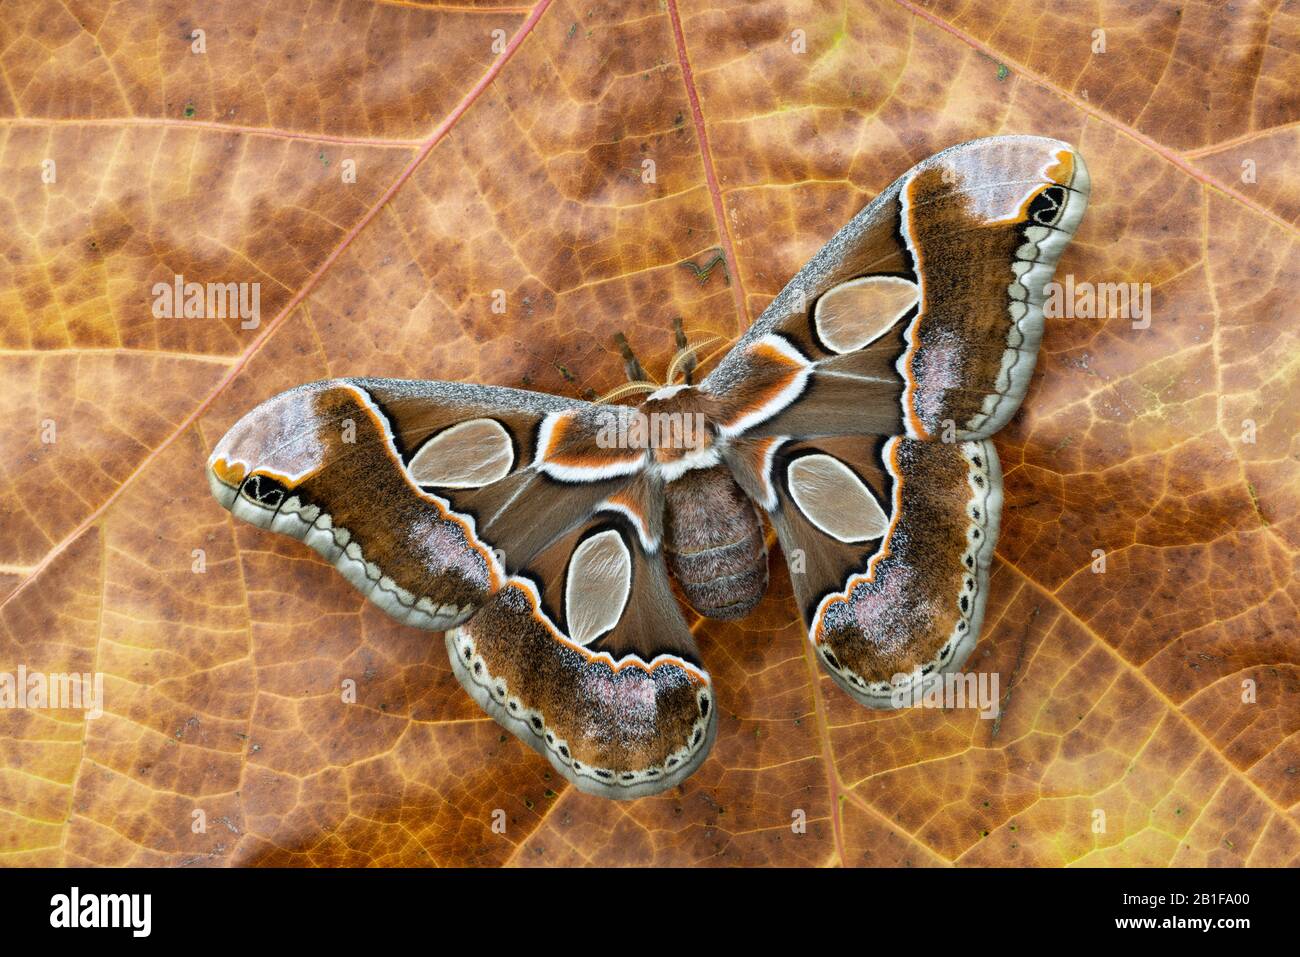 Lebeau's Rotchschildia (Rothschildia lebeau forbesi) aka Forbes' Silkmoth. Adult on sycamore leaf in Texas.  Wings display lilac dusting. Stock Photo